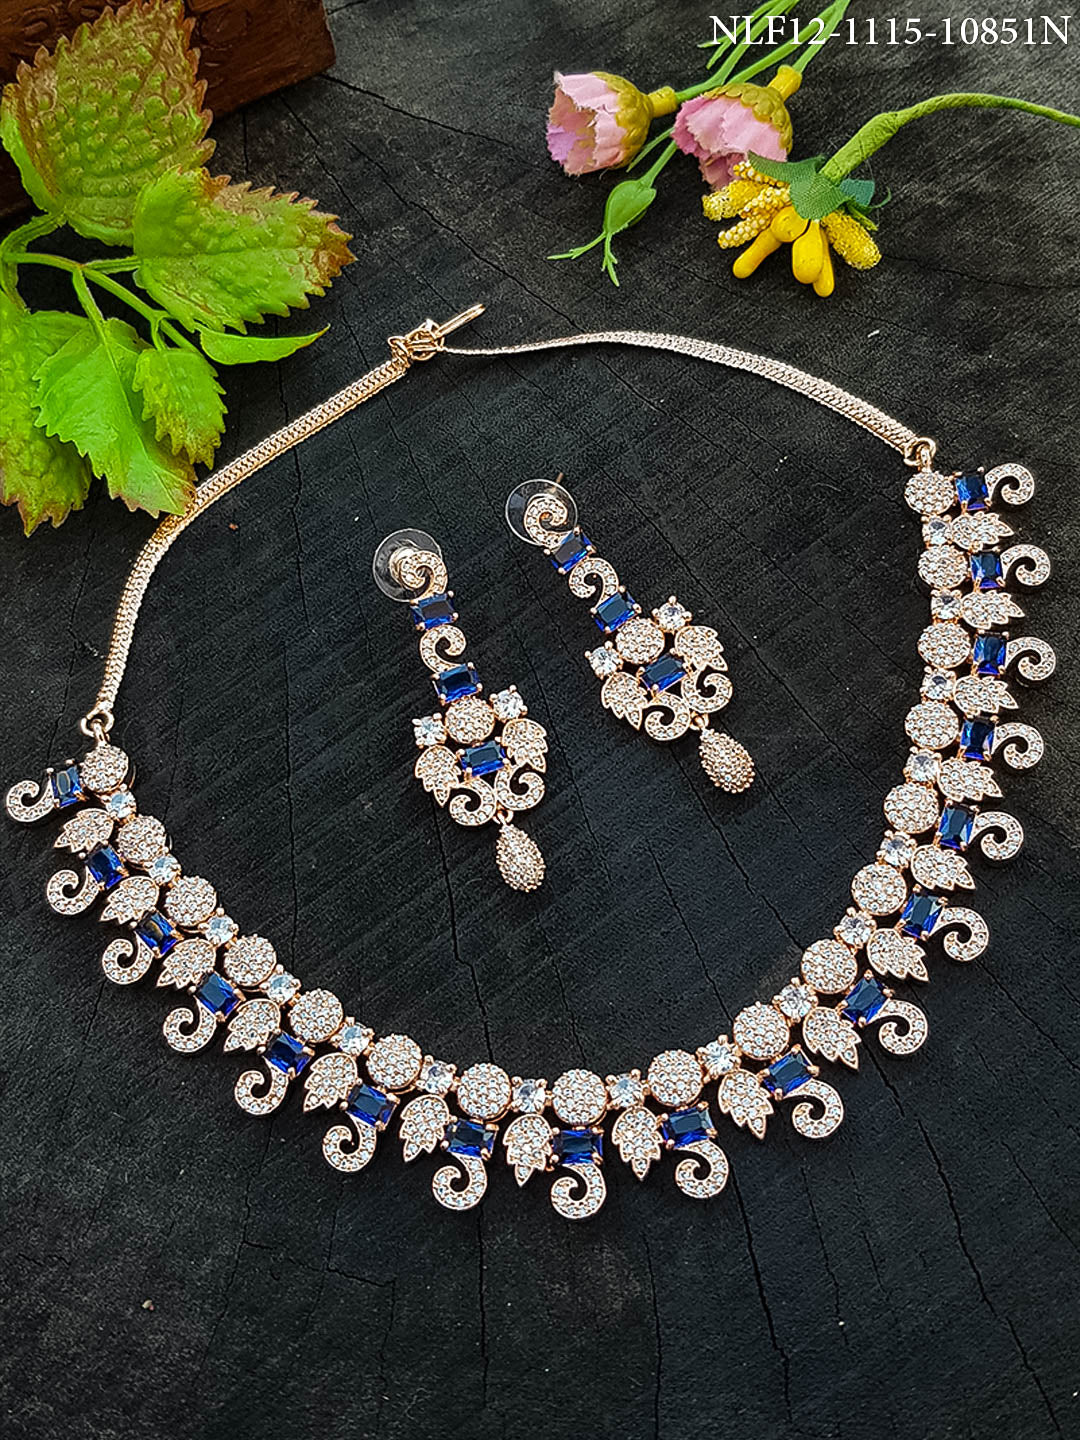 Premium White Gold Plated Sayara Collection Designer Necklace set with blue stones 10851N